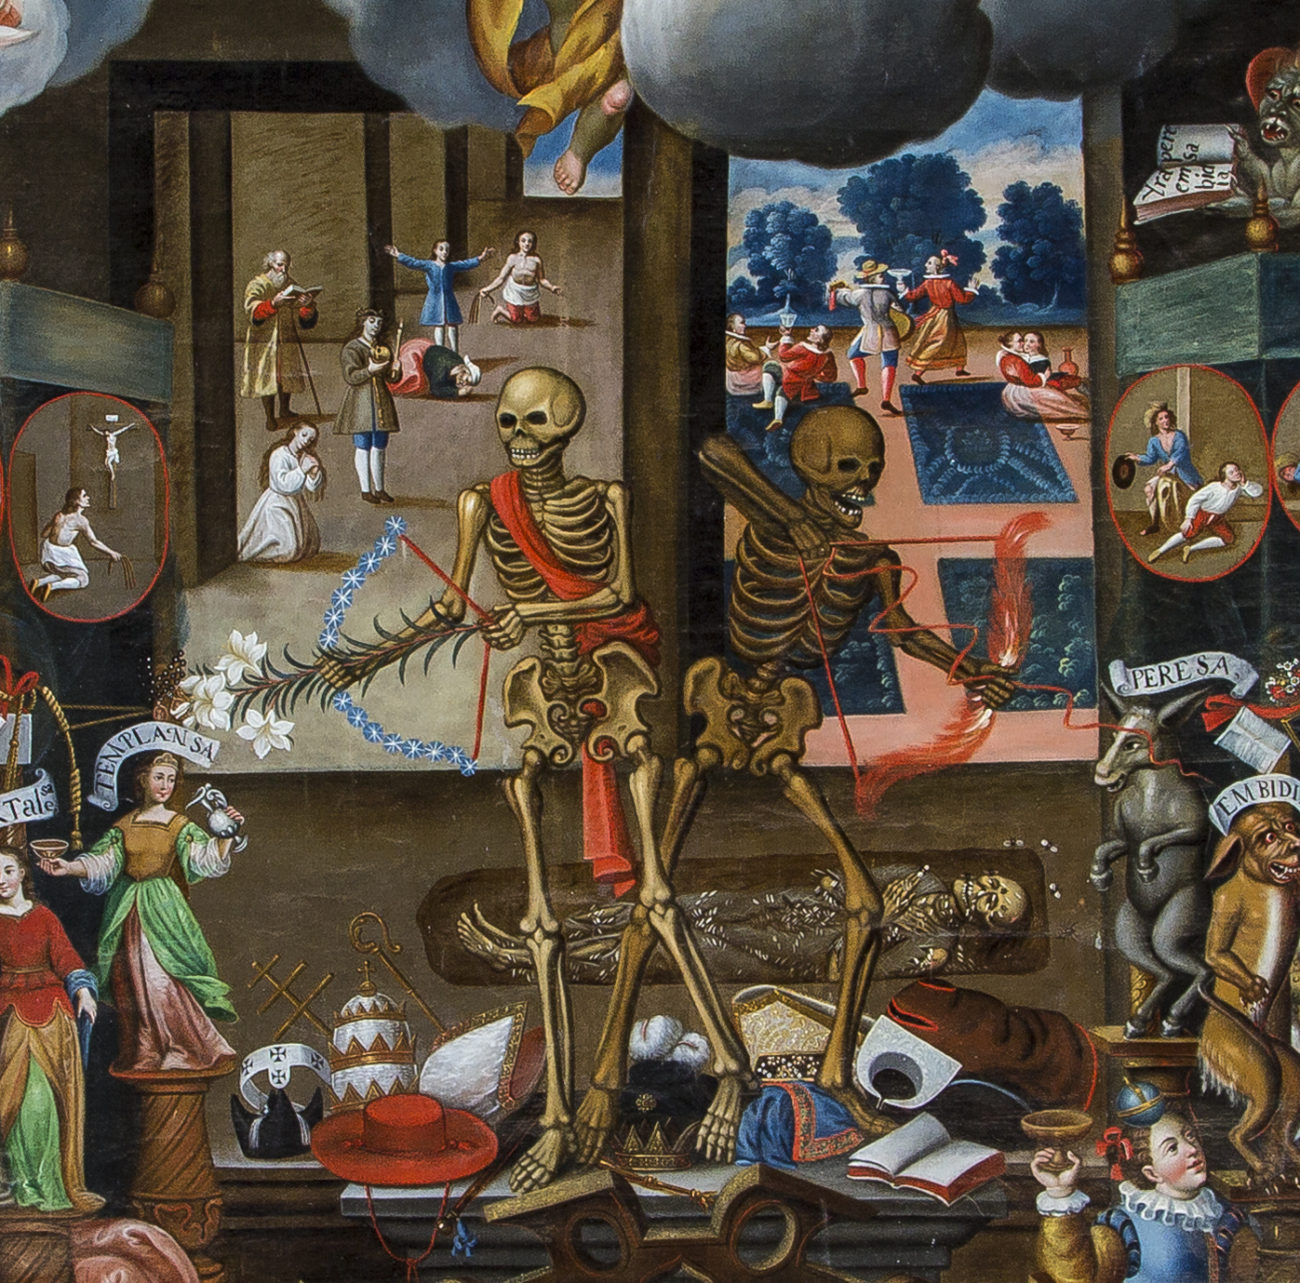 Image of a painting that features two large skeleton figures in the very center. Both skeletons are holding bows and arrows, one made of fire and lightning and the other made of flowers, which are pointed at smaller human and animal figures to the very right and left edges of the painting. There are two smaller scenes in the background depicting a party and the other showing people reading and praying